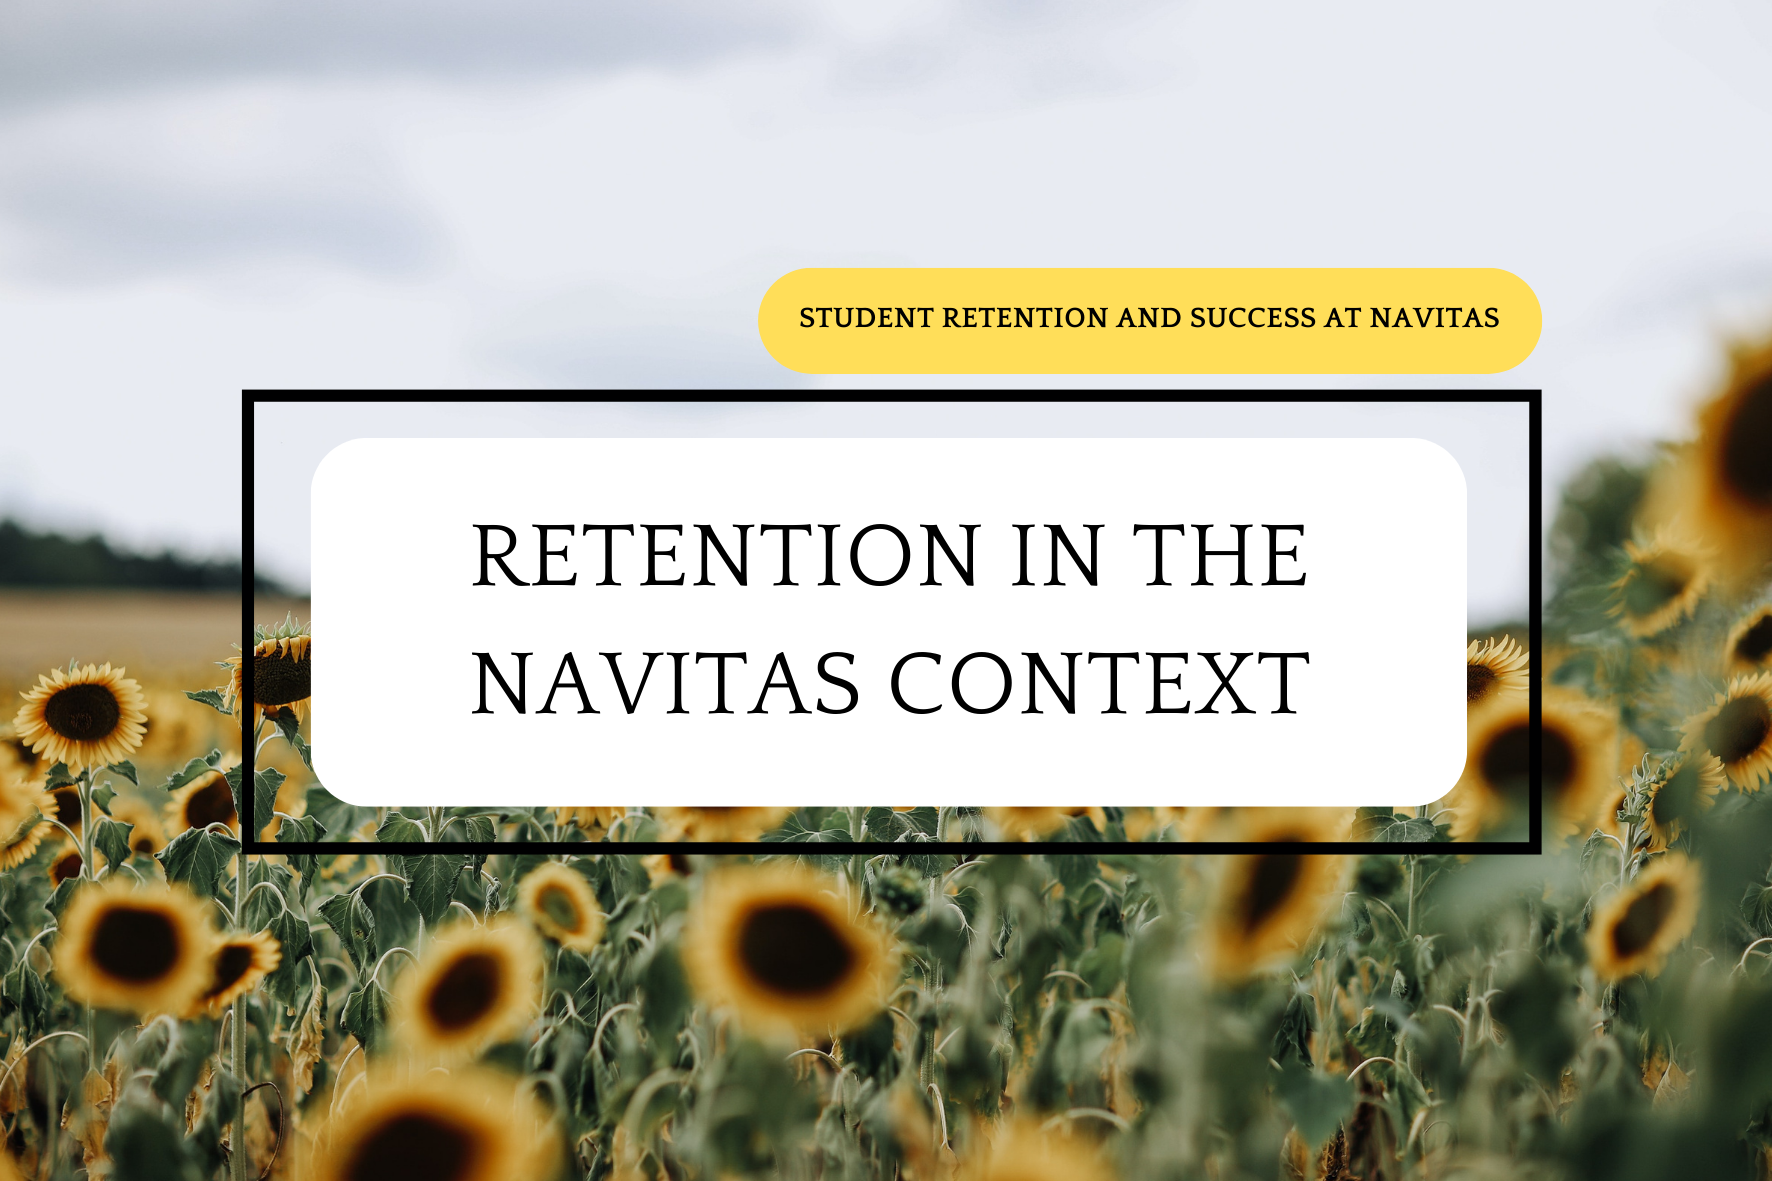 Retention in the Navitas Context: Supporting student retention and success